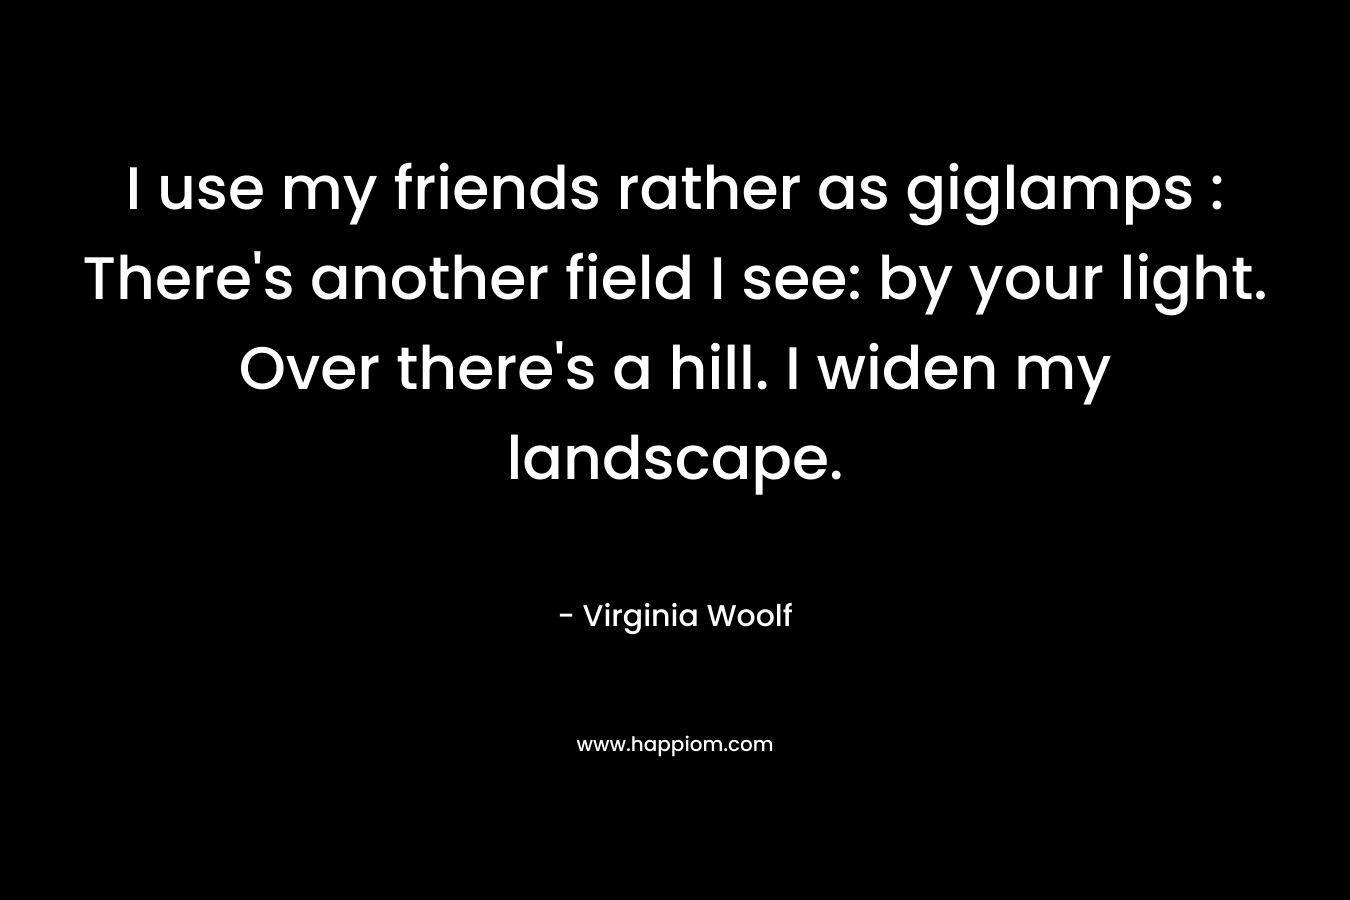 I use my friends rather as giglamps : There's another field I see: by your light. Over there's a hill. I widen my landscape.